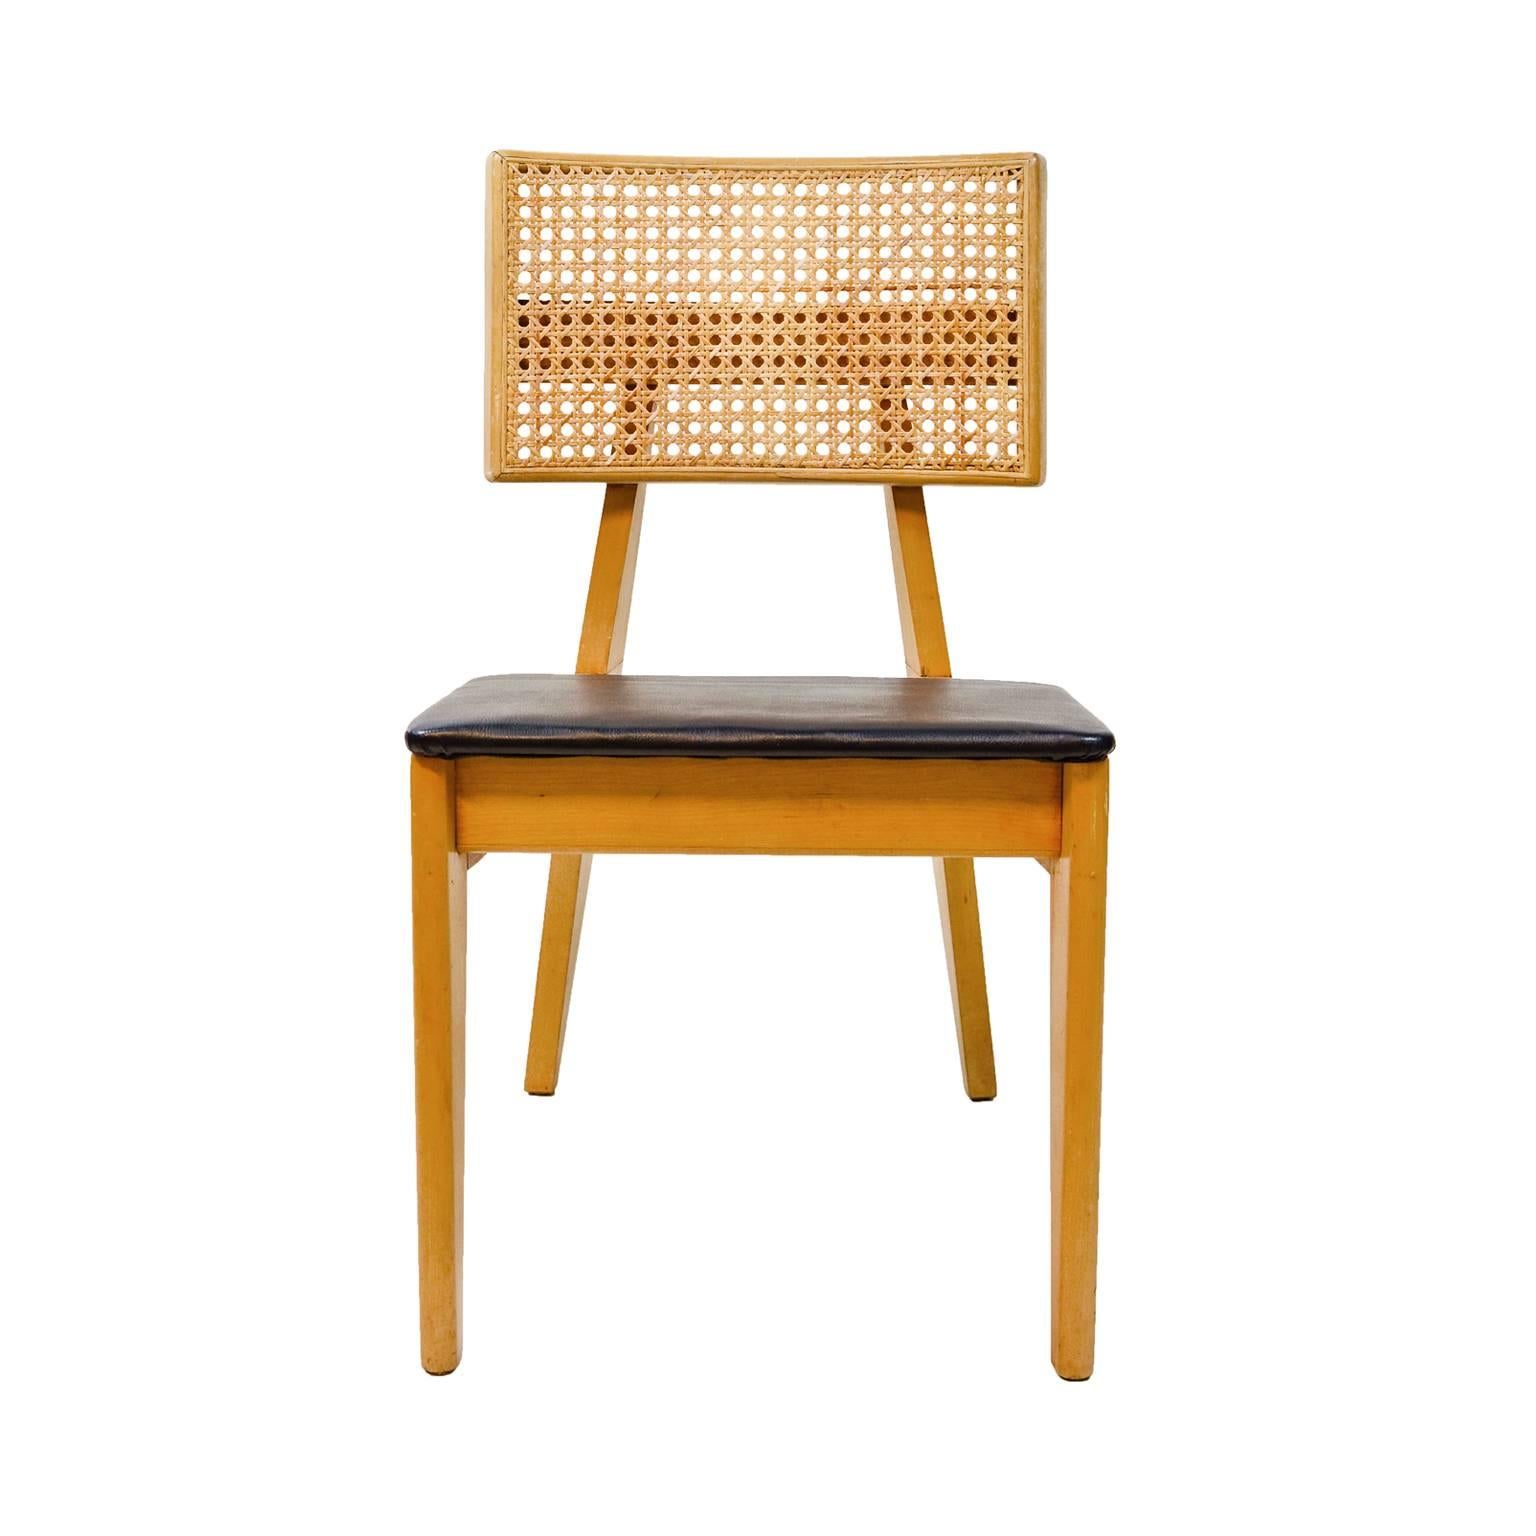 Cane back side chair by George Nelson for Herman Miller,
circa 1940s.